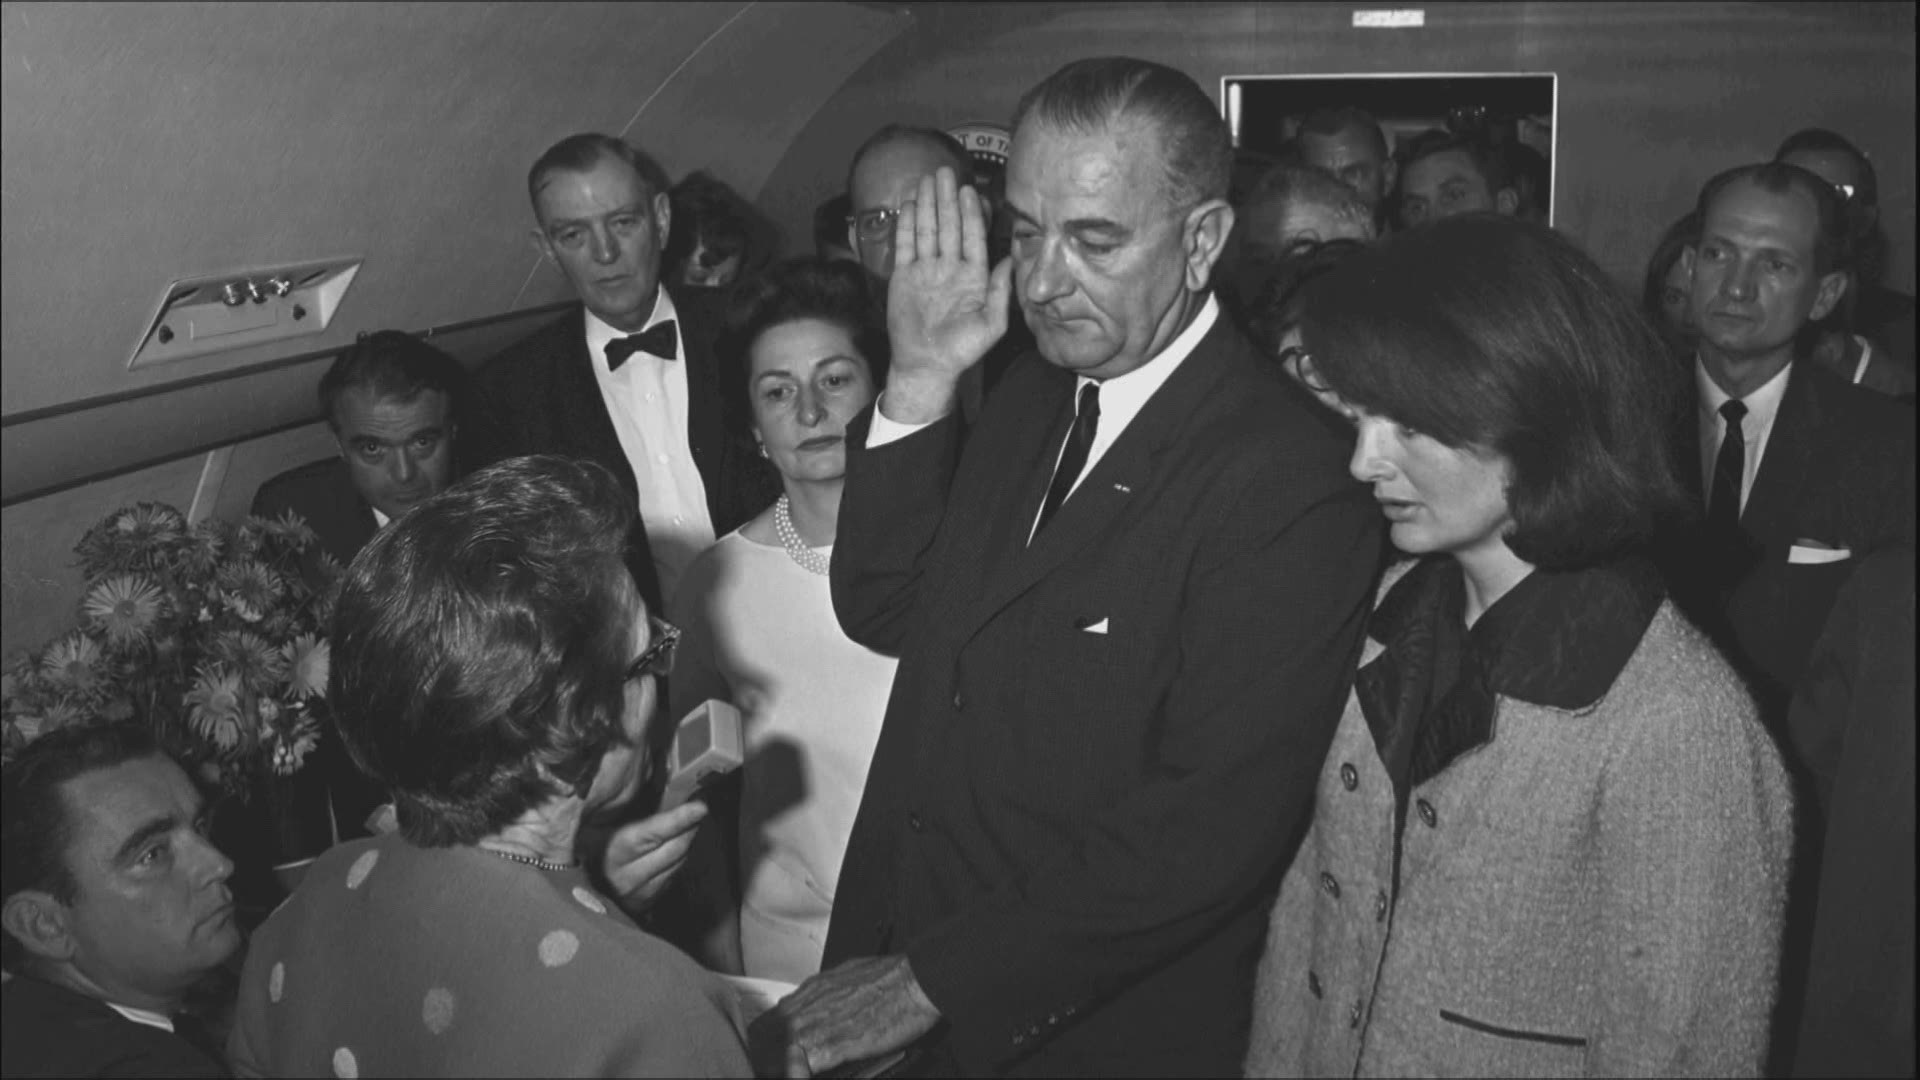 Lyndon B. Johnson was sworn-in just one hour and 38 minutes after President John F. Kennedy was pronounced dead on Nov. 22, 1963.